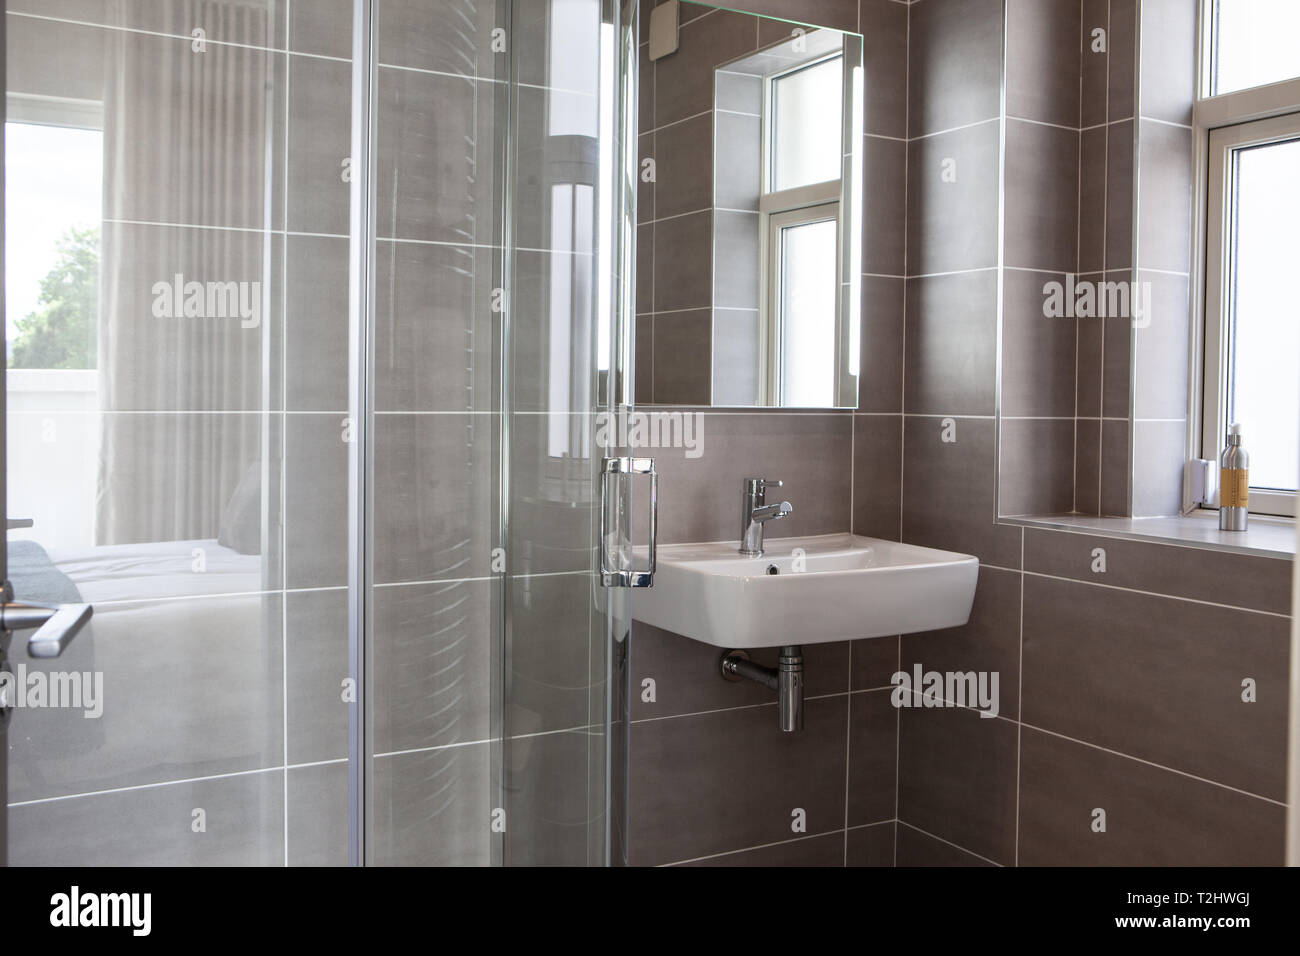 Modern bathroom with sink fixture and shower cubicle with glass door Stock Photo